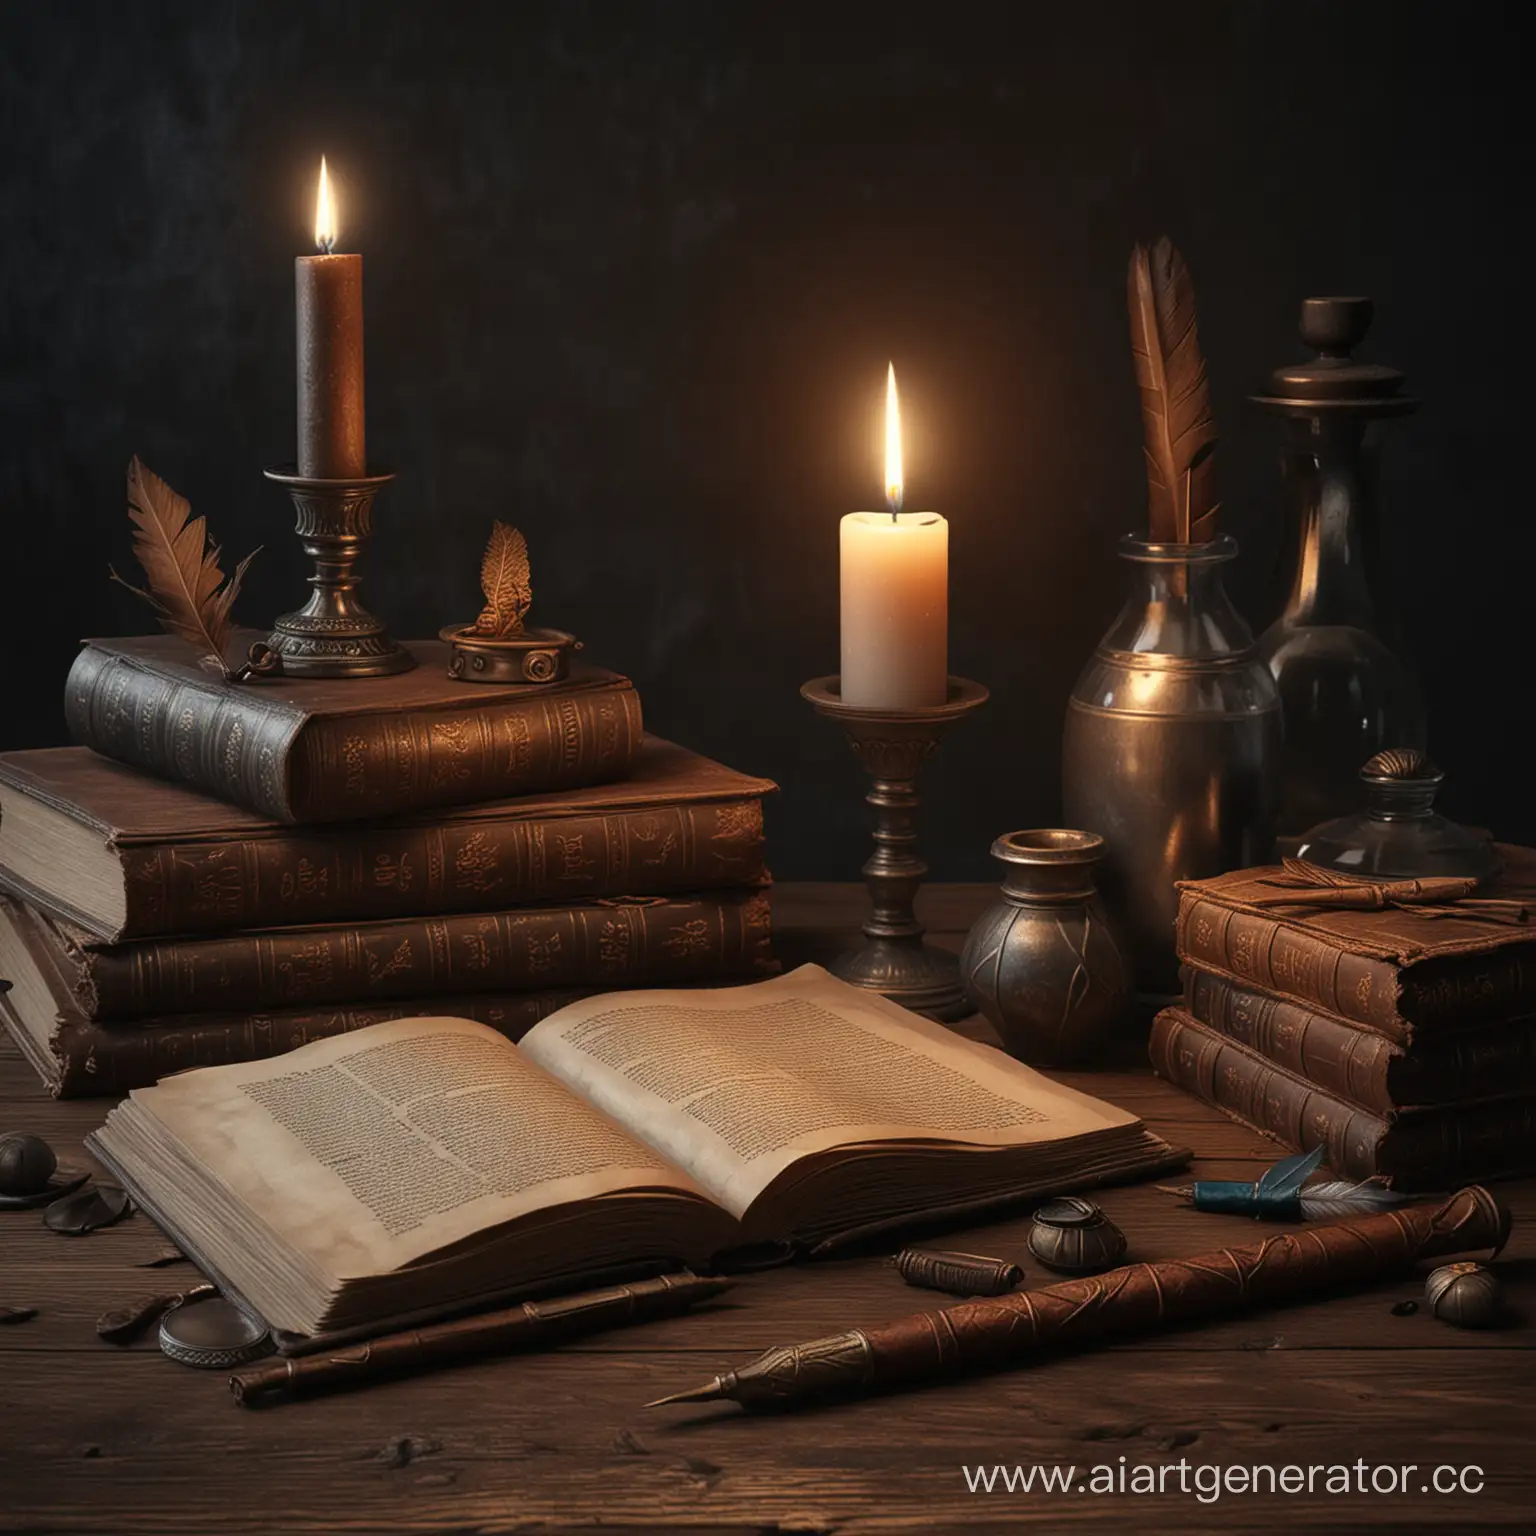 Enchanted-Study-Closeup-of-Ancient-Books-and-Candlelit-Quill-Inkwell